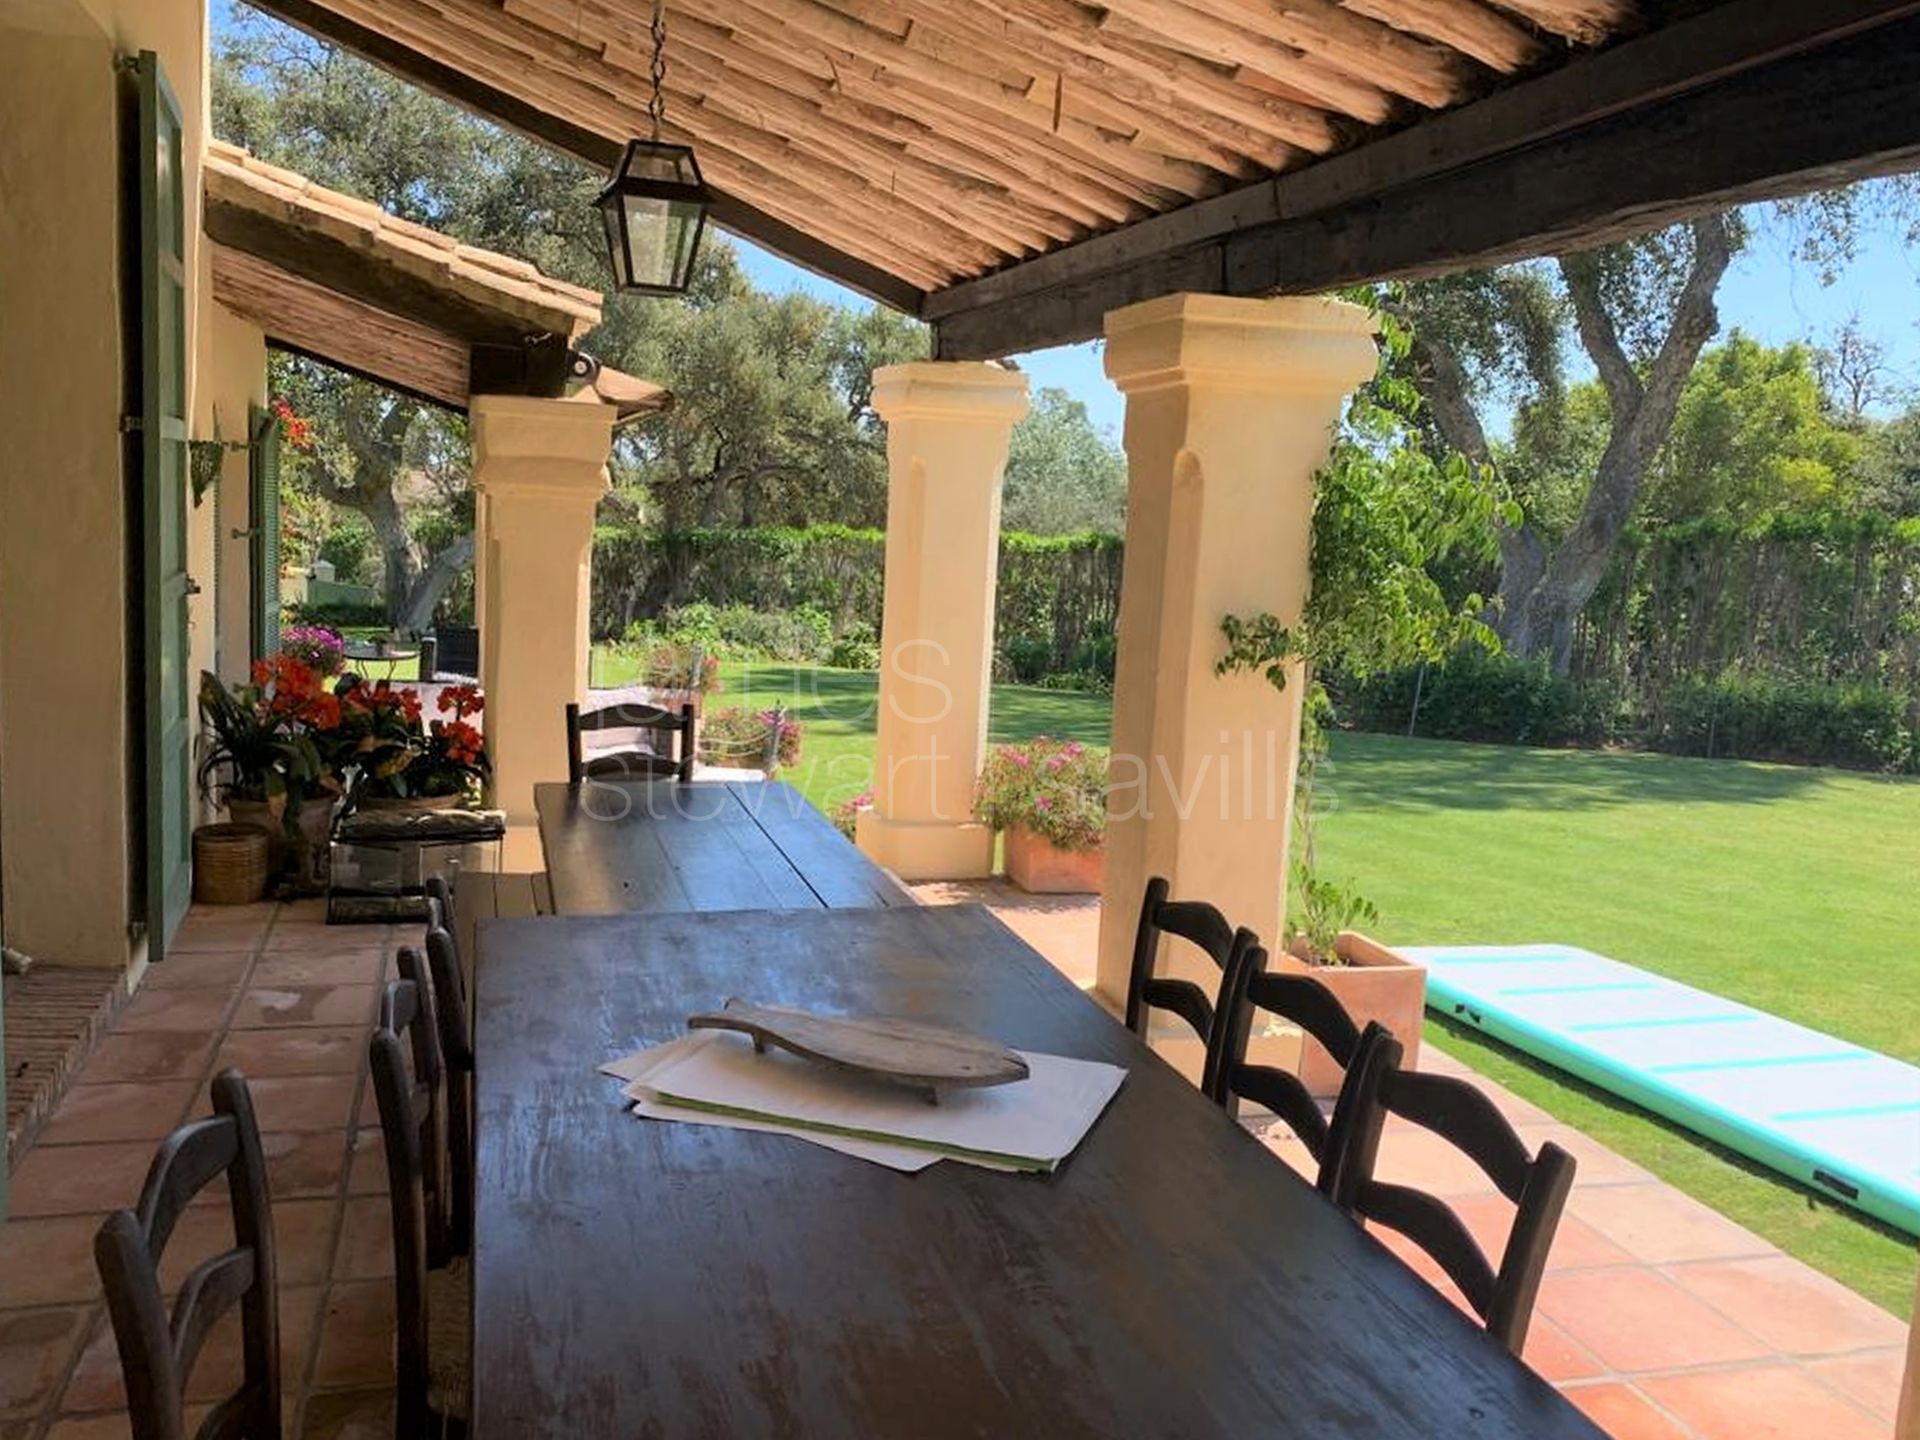 Looking for a country house a few minutes from the coast - here it is in the heart of Sotogrande